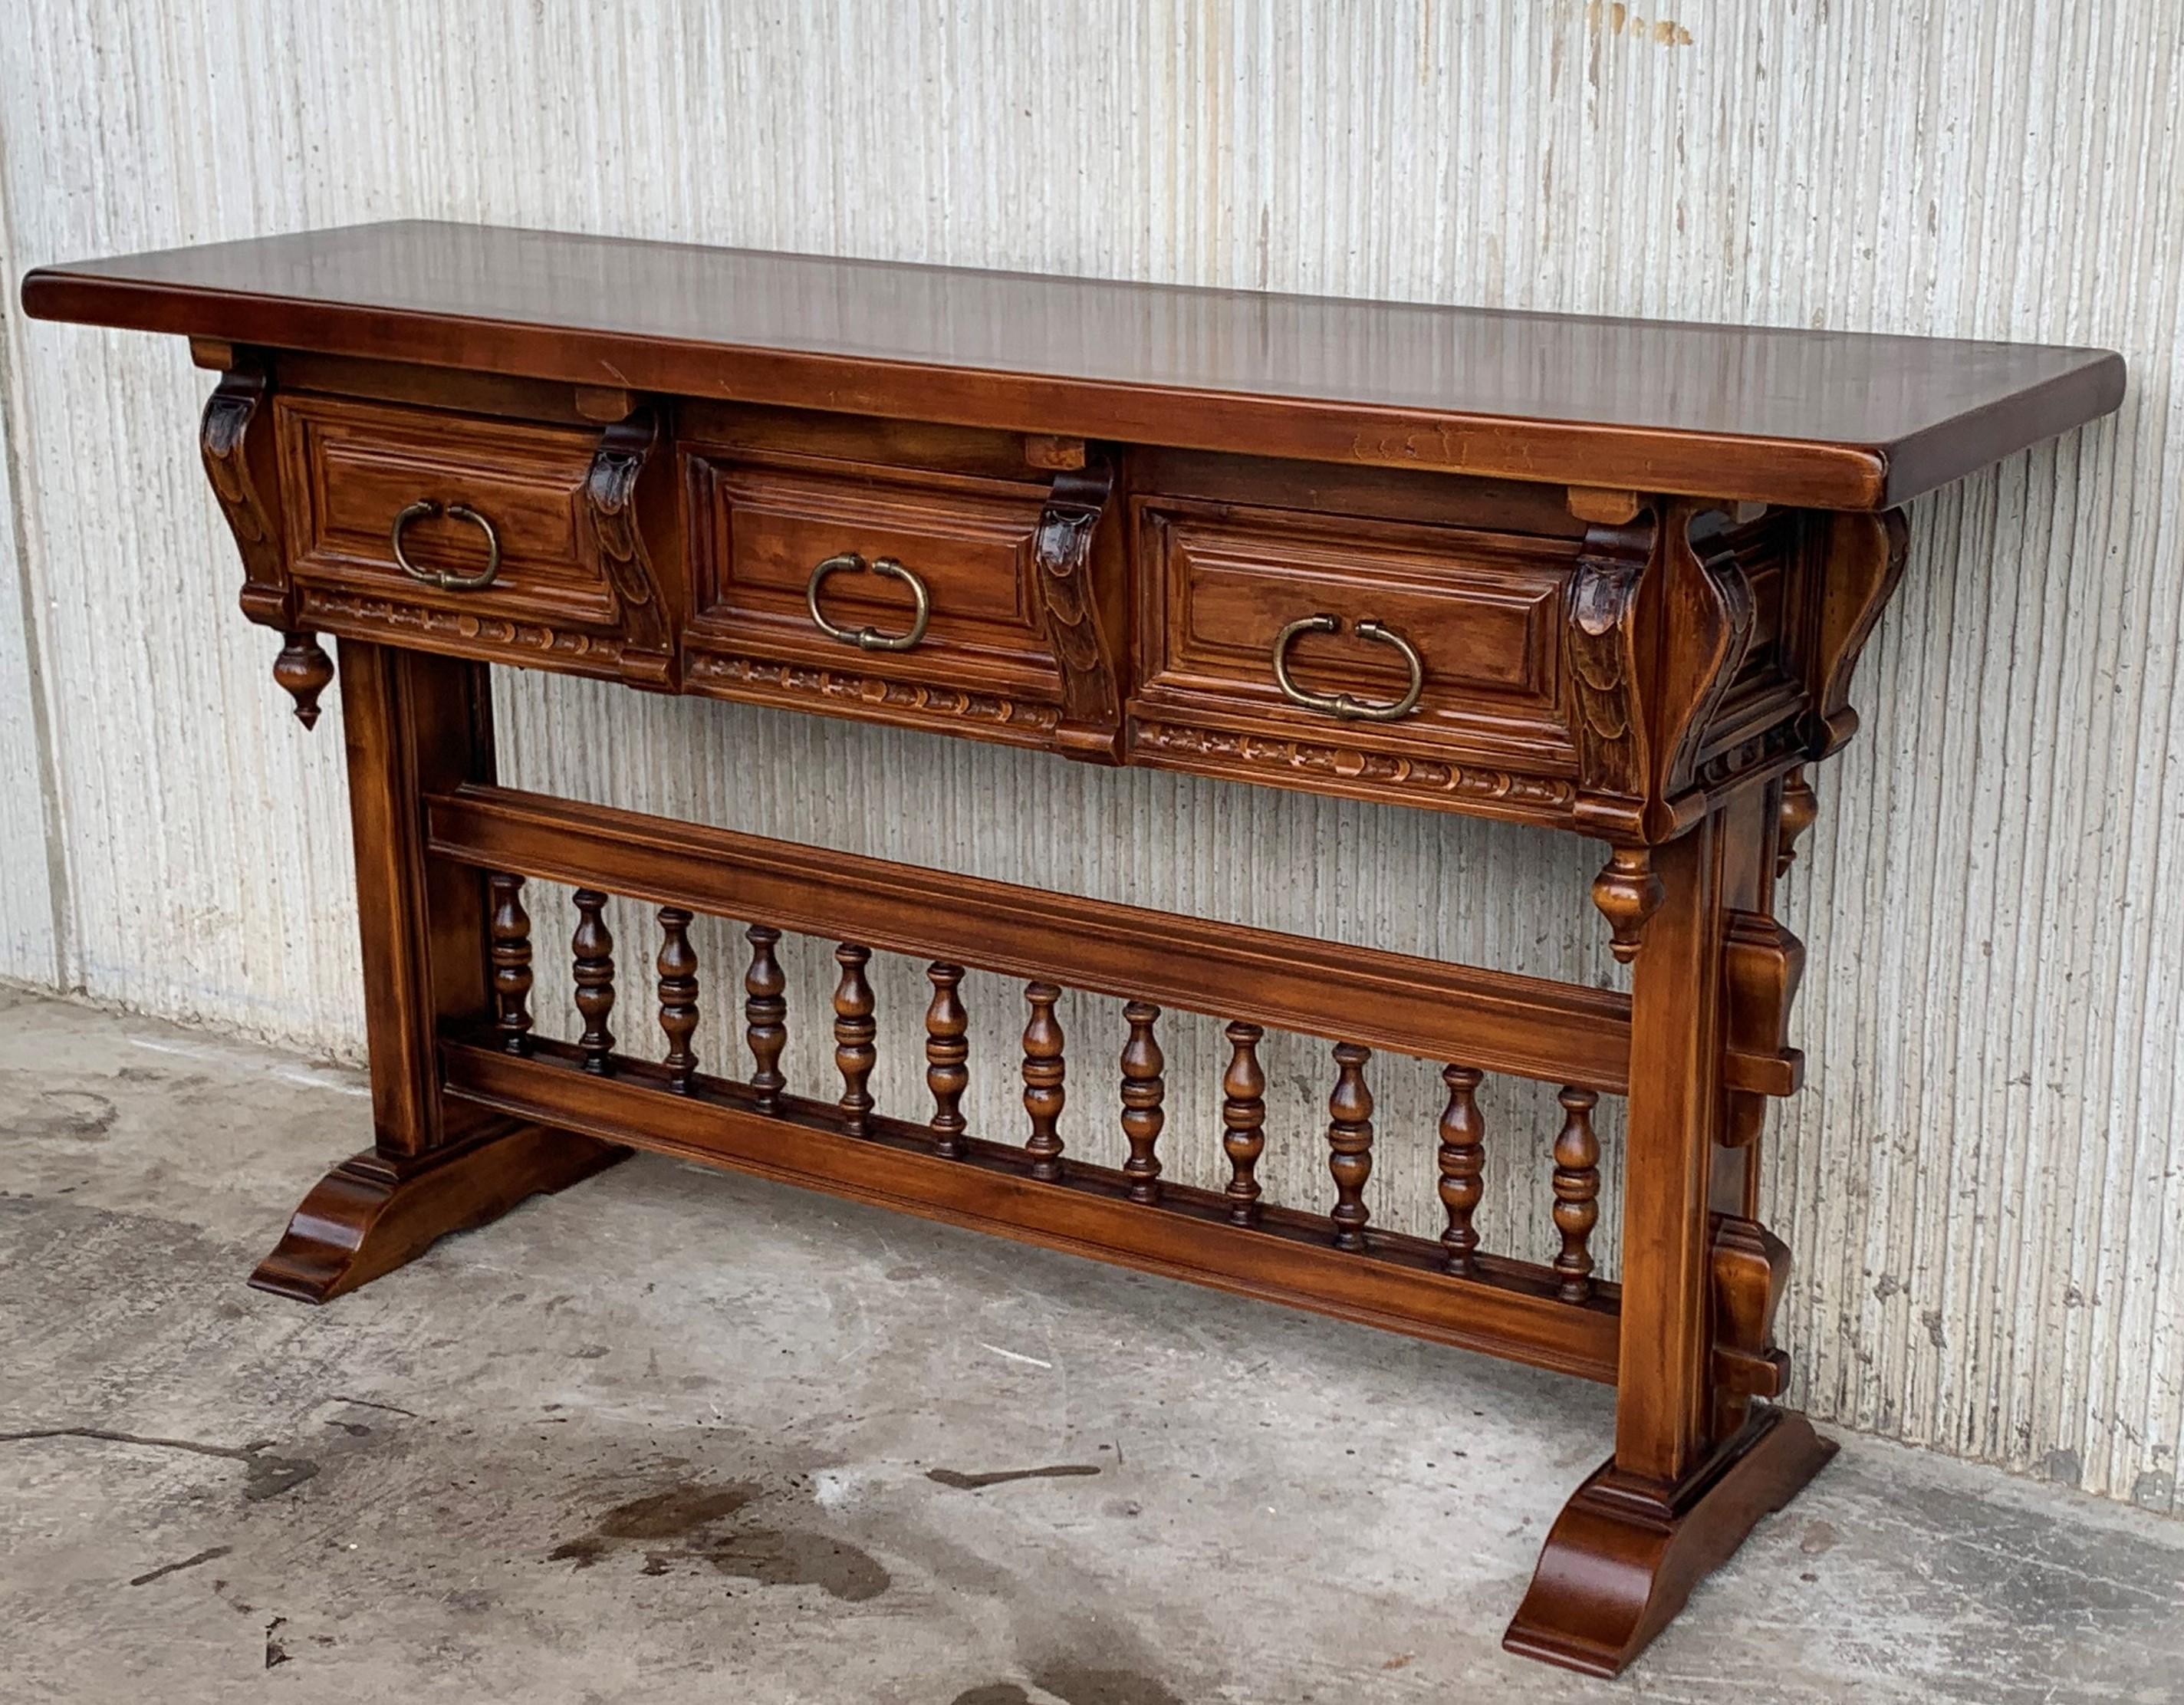 Baroque Console Table in Walnut with Three Carved Drawers and Stretcher In Good Condition For Sale In Miami, FL